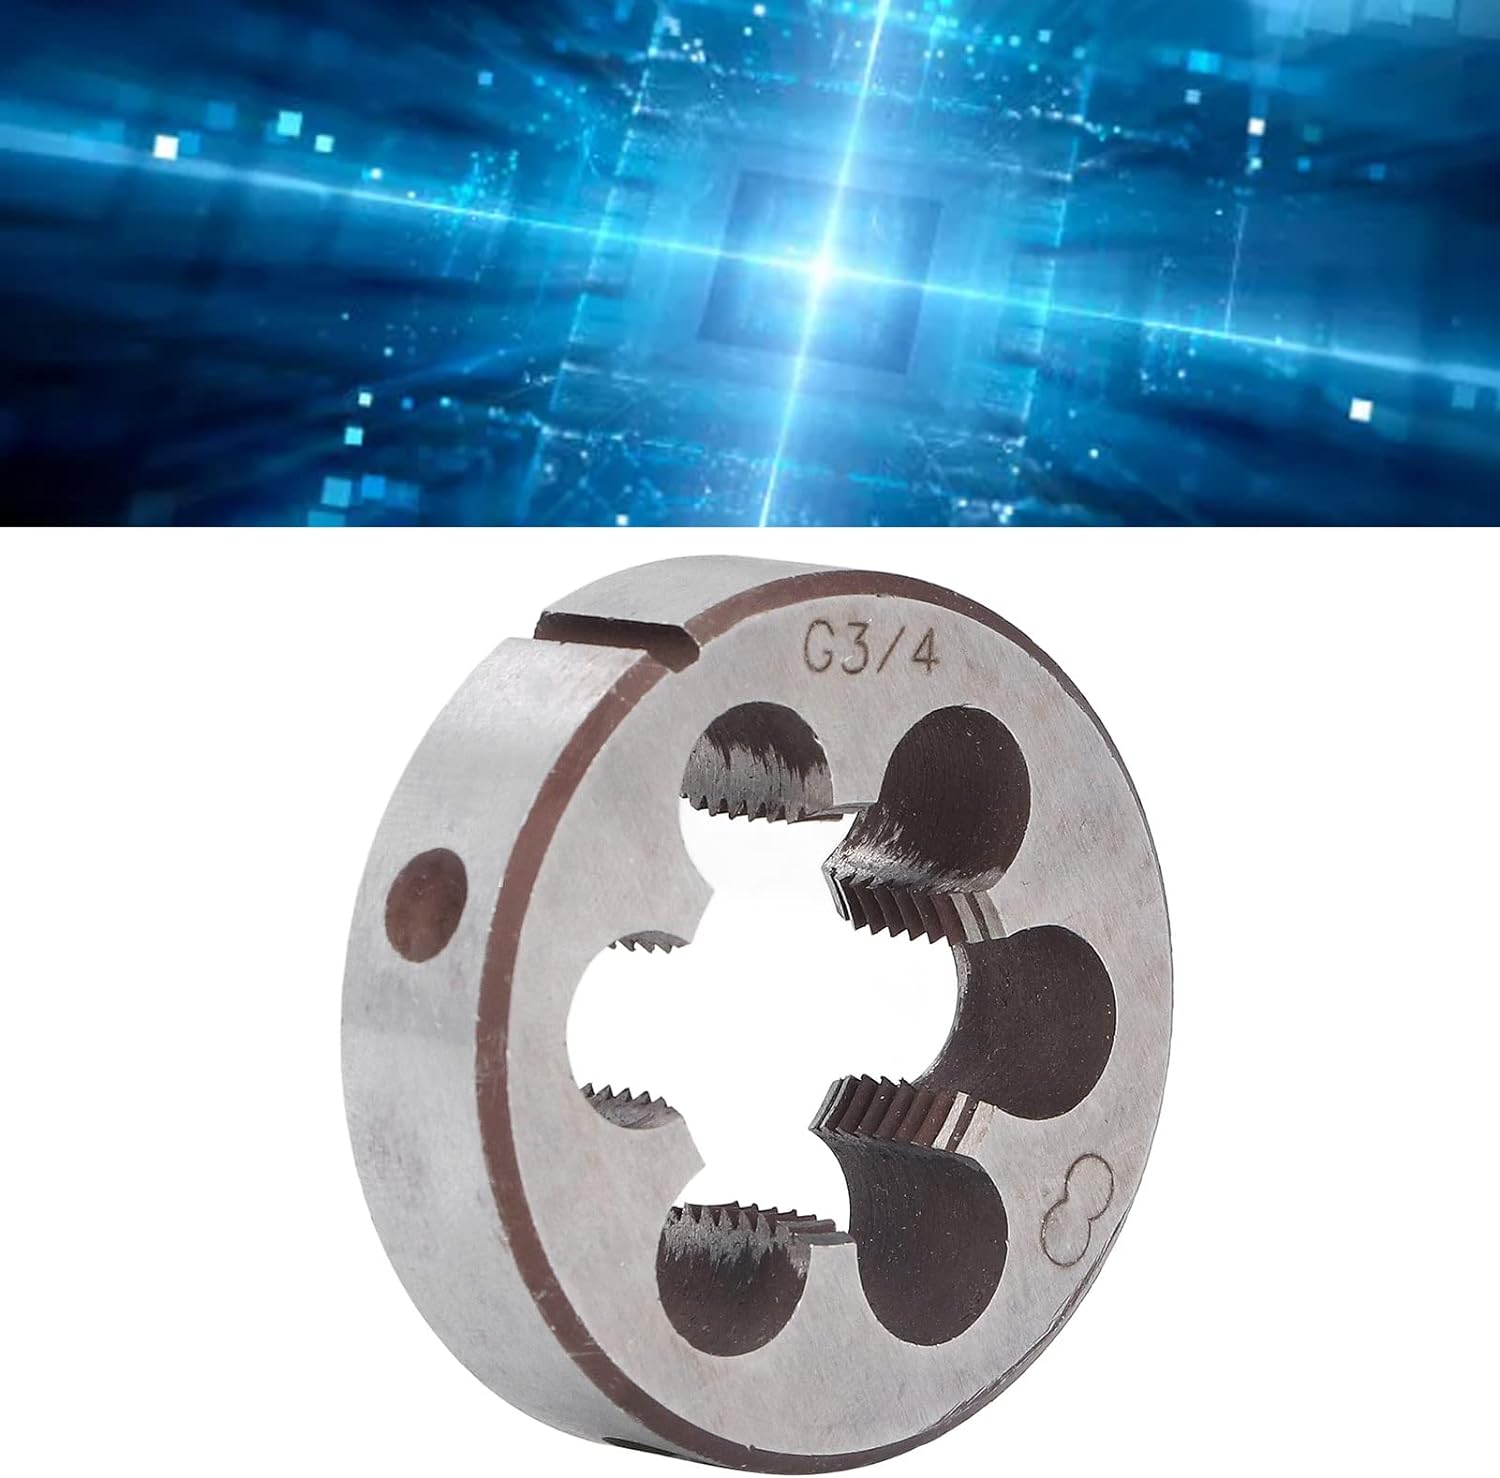 Round Threading Die, Machine Thread Right Hand Thread Adapter Detective Process Steel Cast Iron Copper and Aluminum